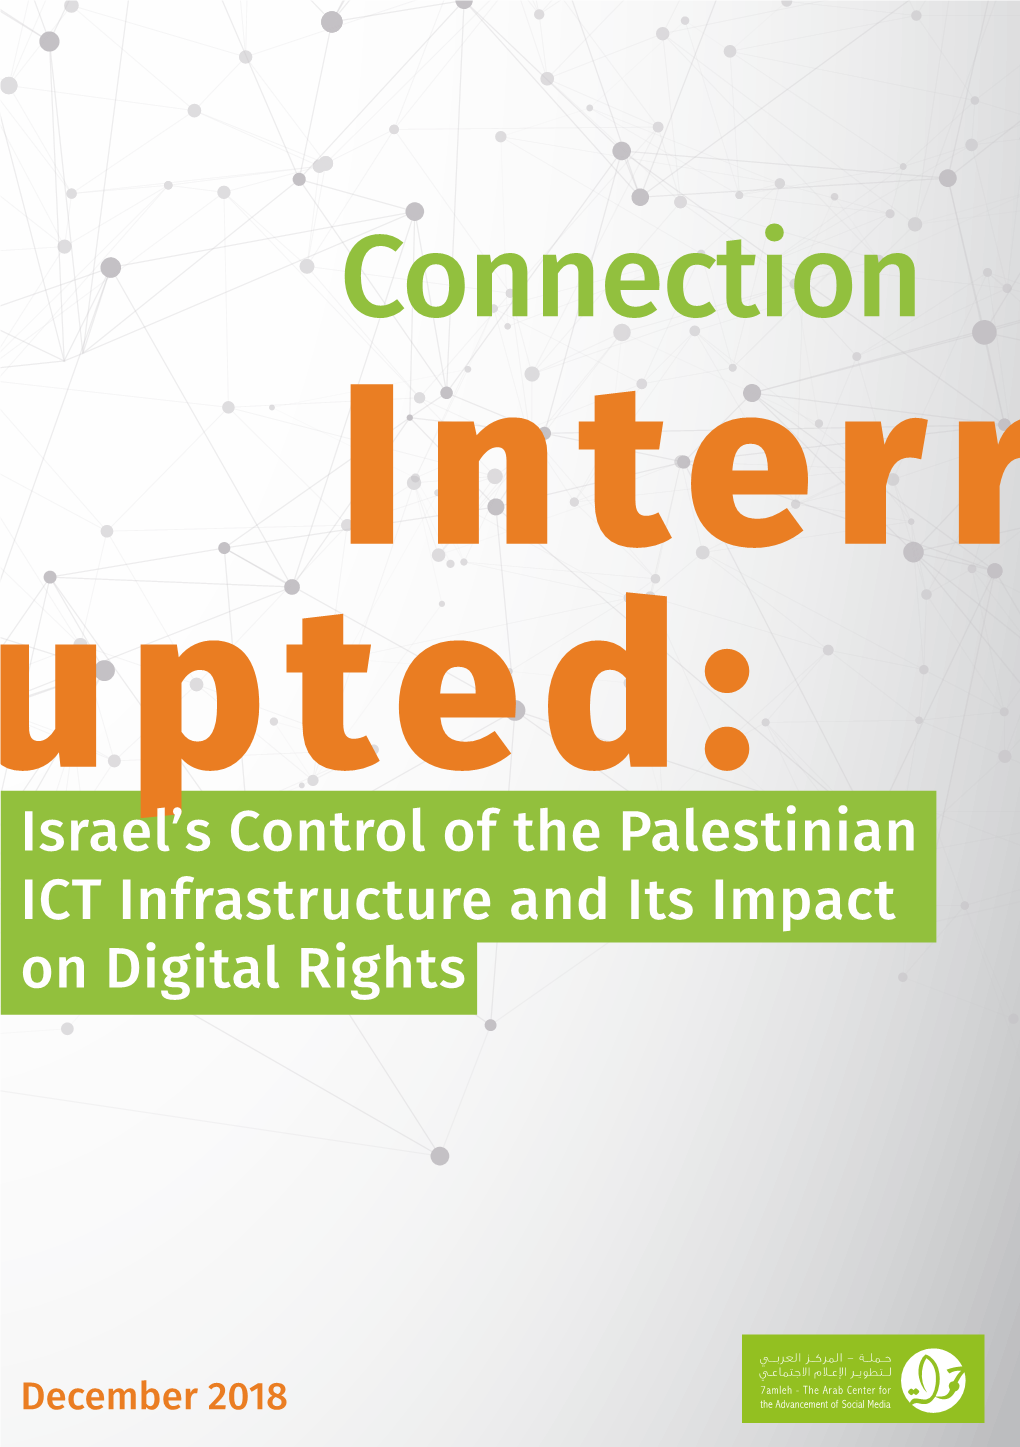 Connection Interrupted: Israel's Control of the Palestinian ICT Infrastructure